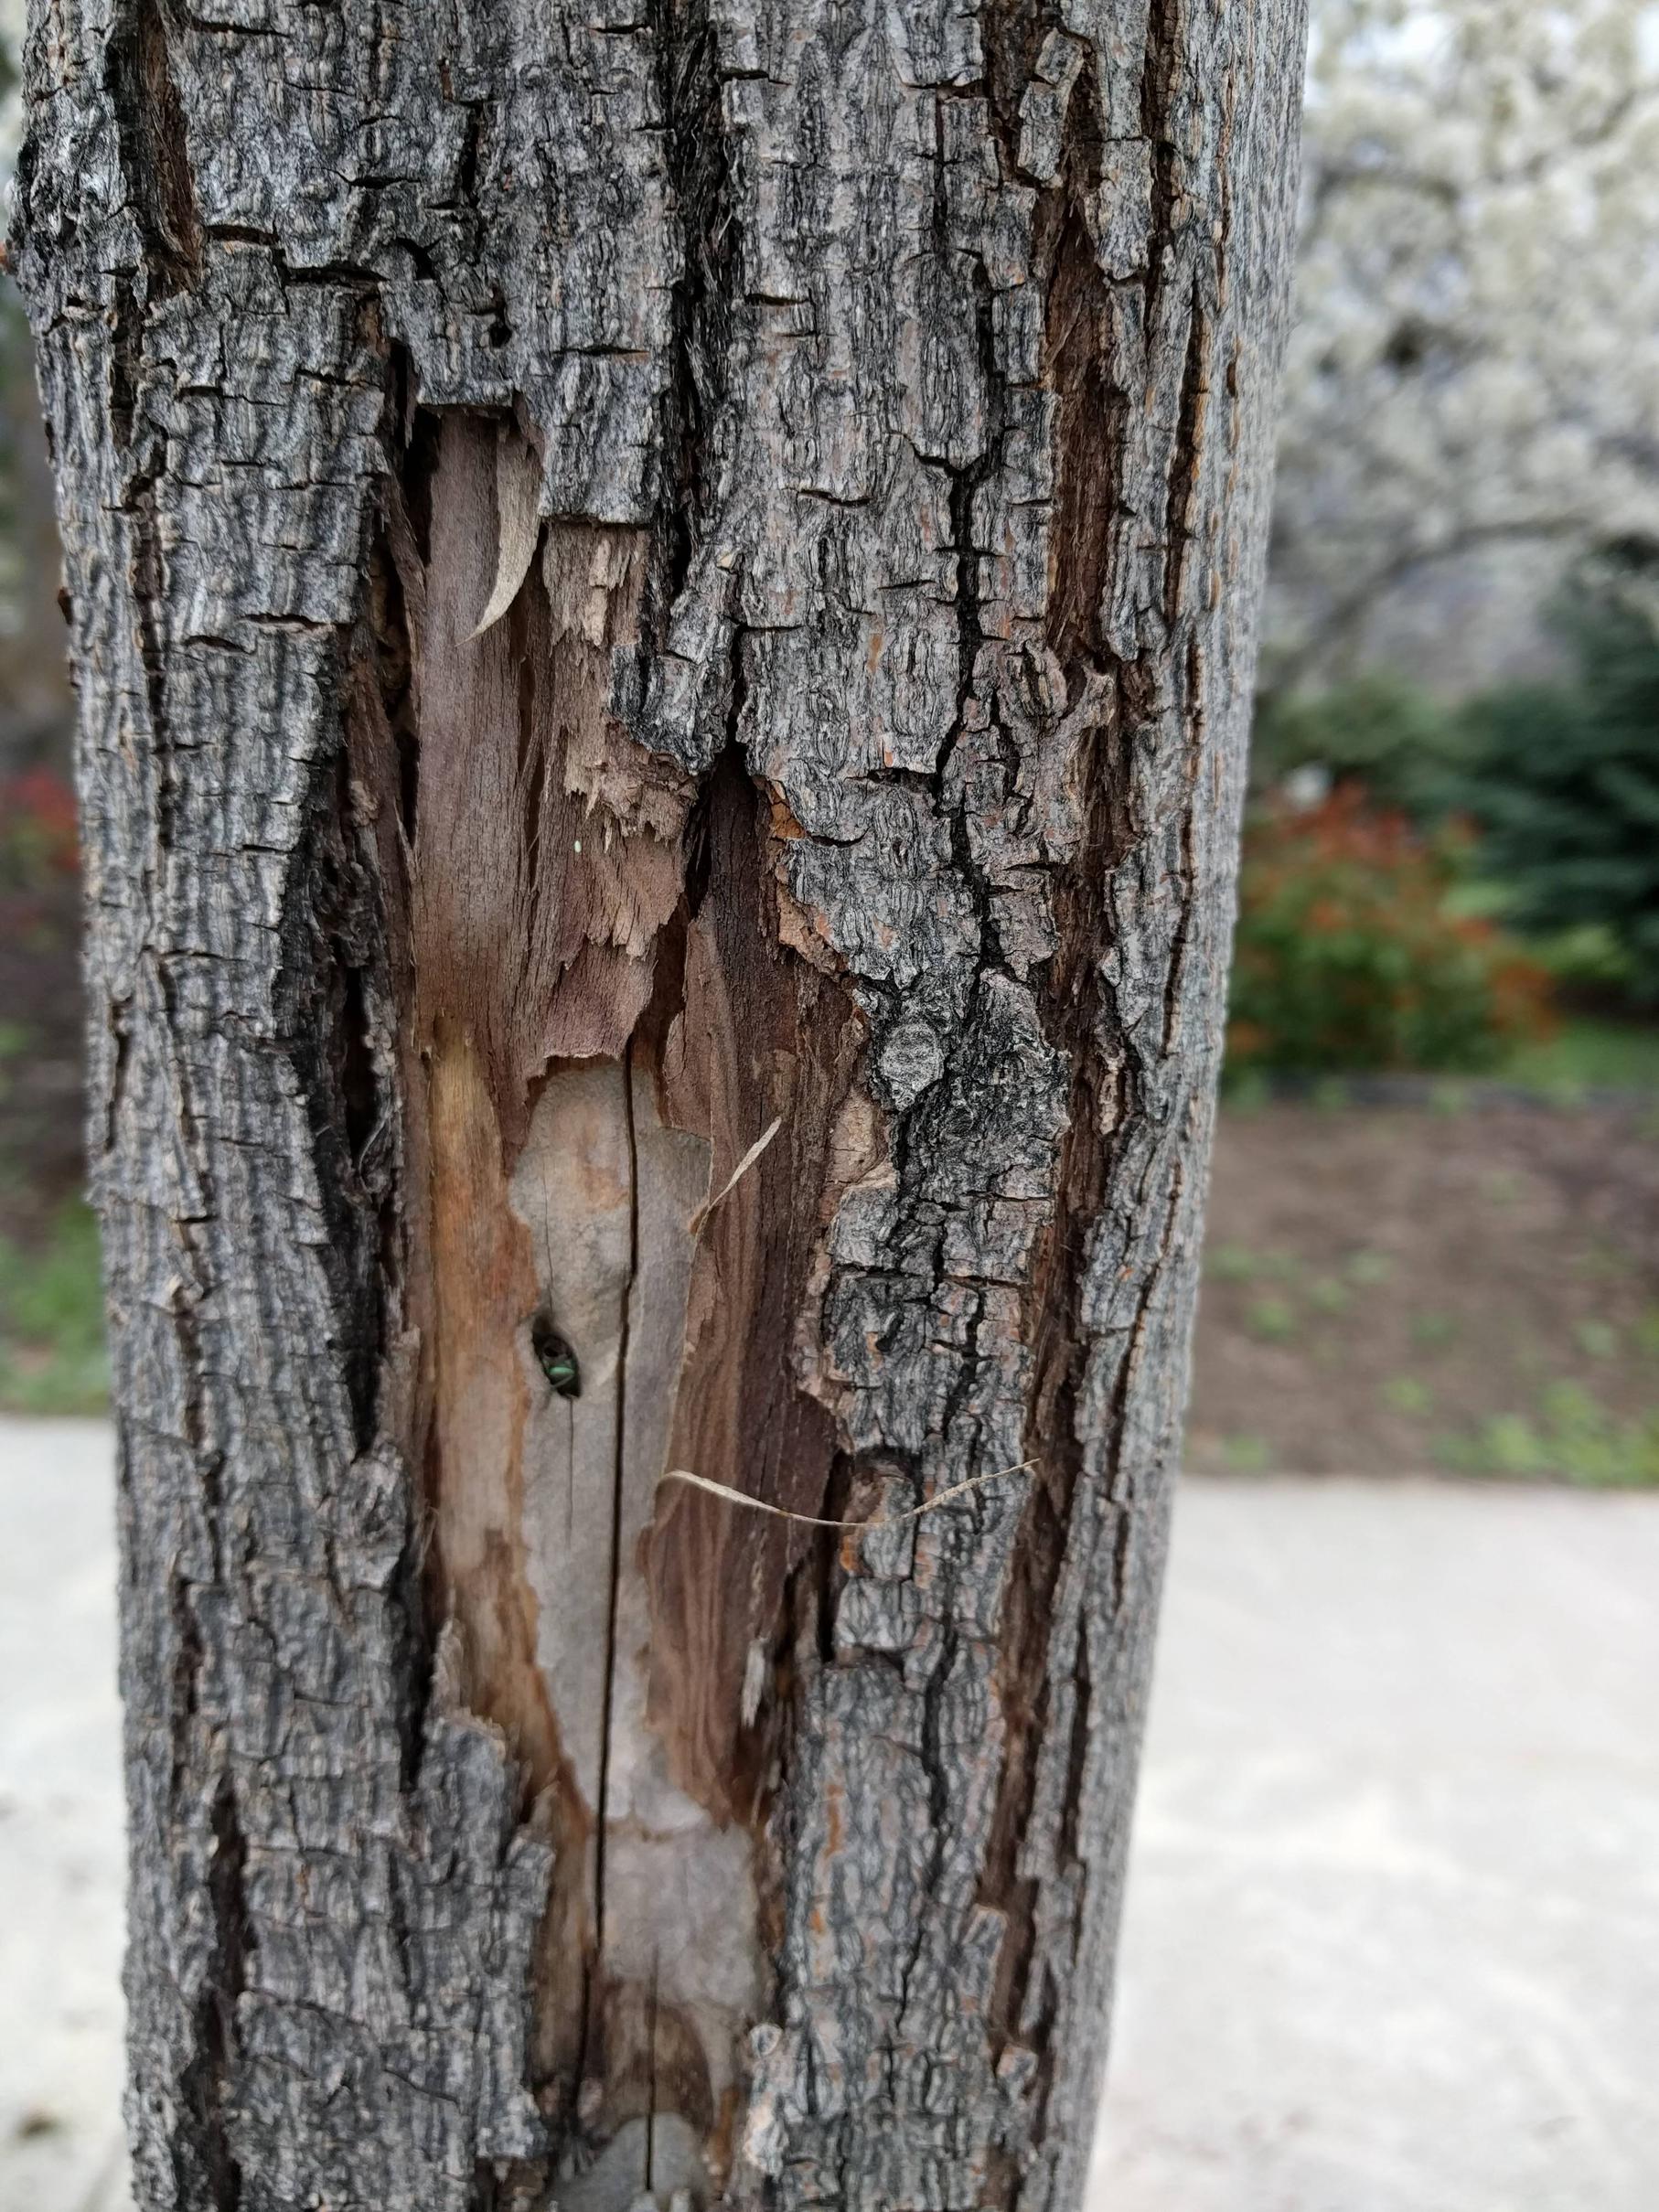 diagnosis - What is wrong with my trees? The bark on one side is ...